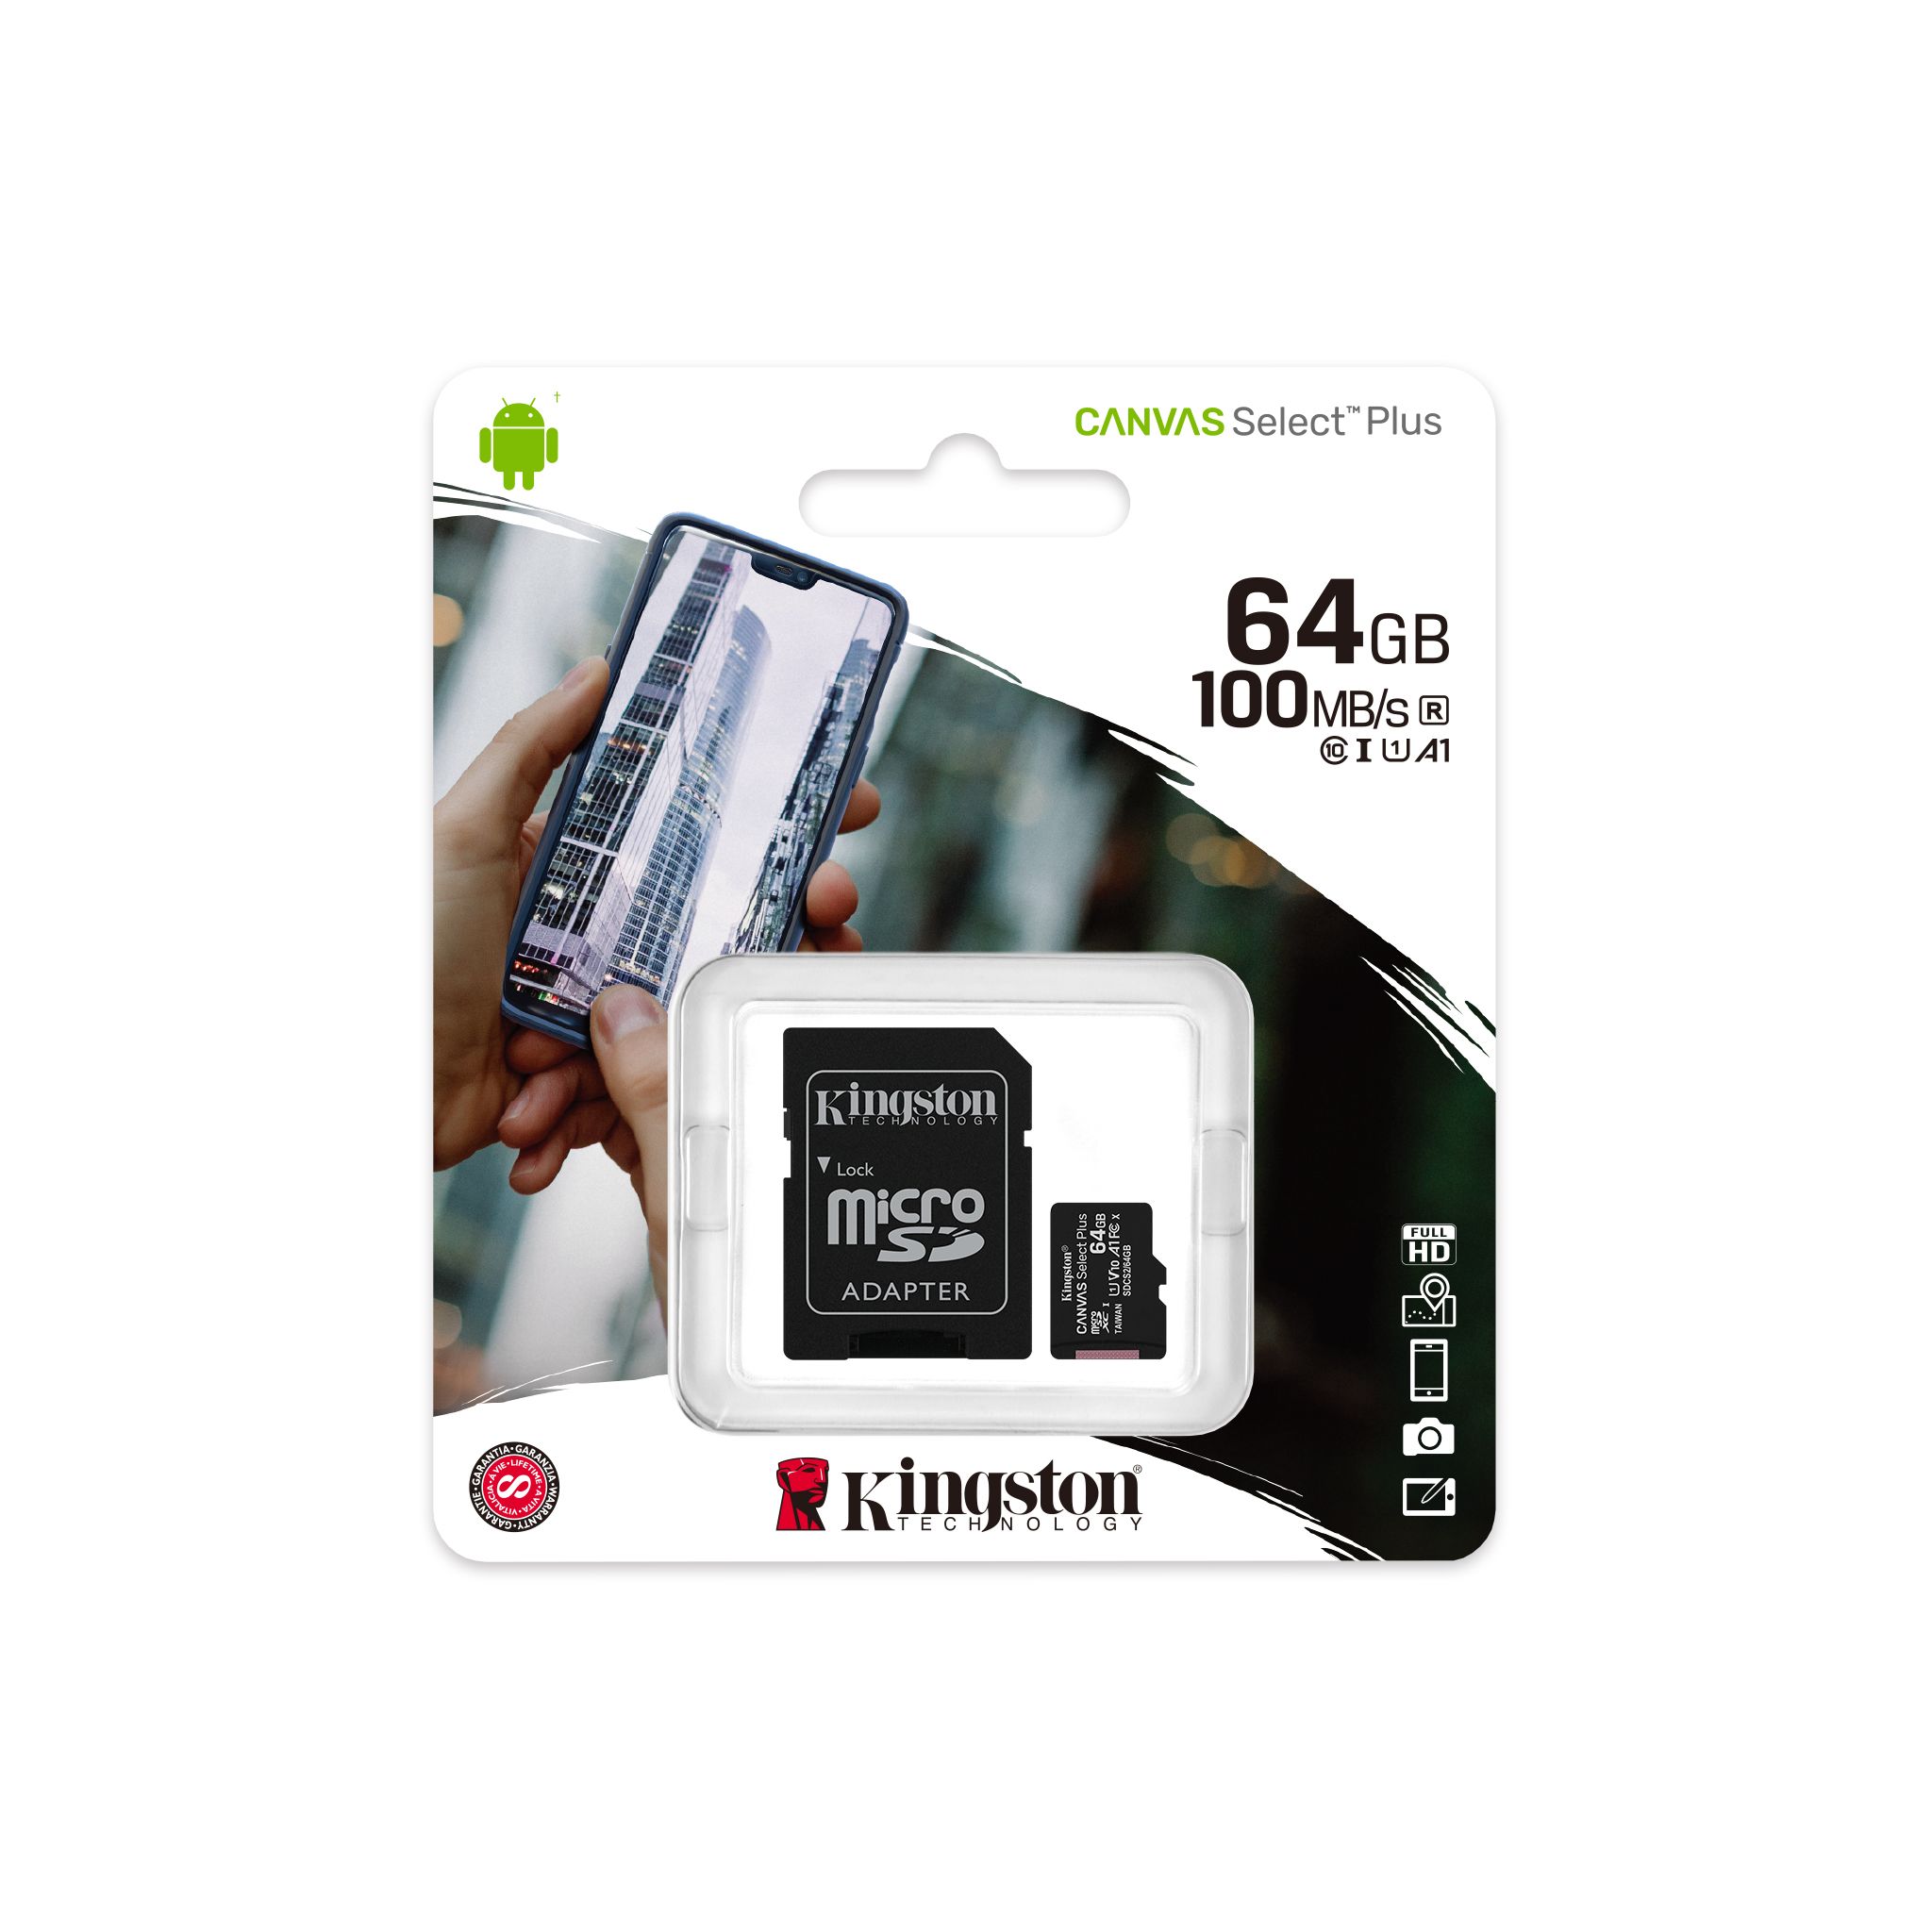 Kingston 64GB Acer S56 MicroSDXC Canvas Select Plus Card Verified by SanFlash. 100MBs Works with Kingston 